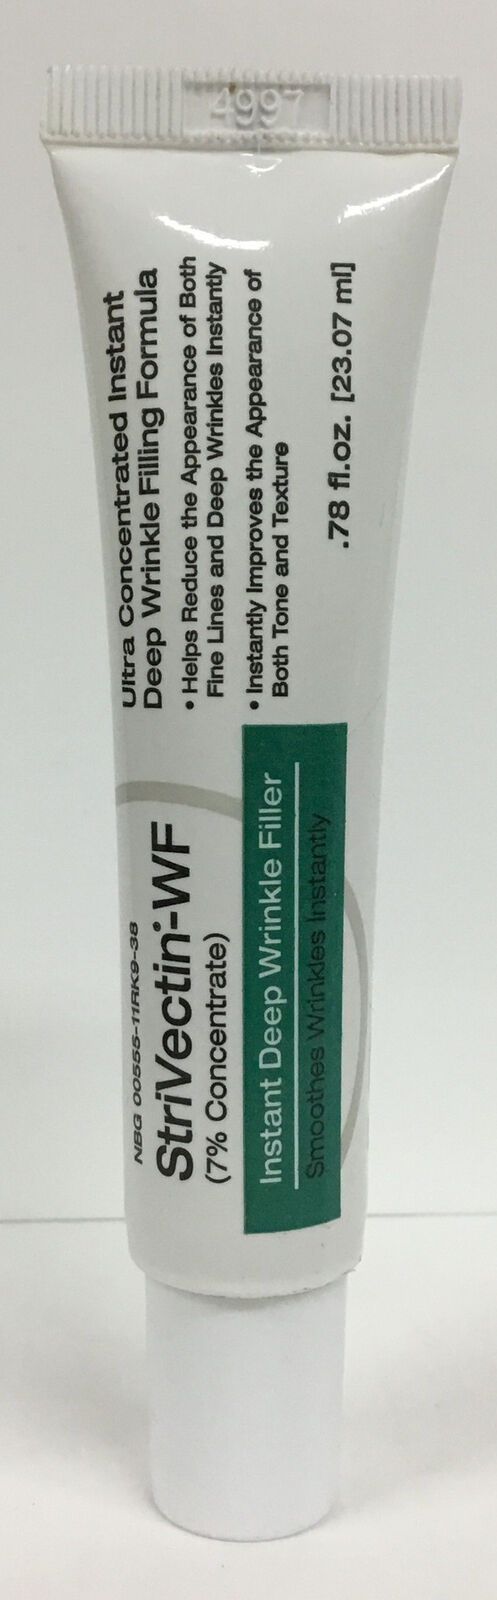 StriVectin-WF Instant Deep Wrinkle Filler .78oz As Pictured